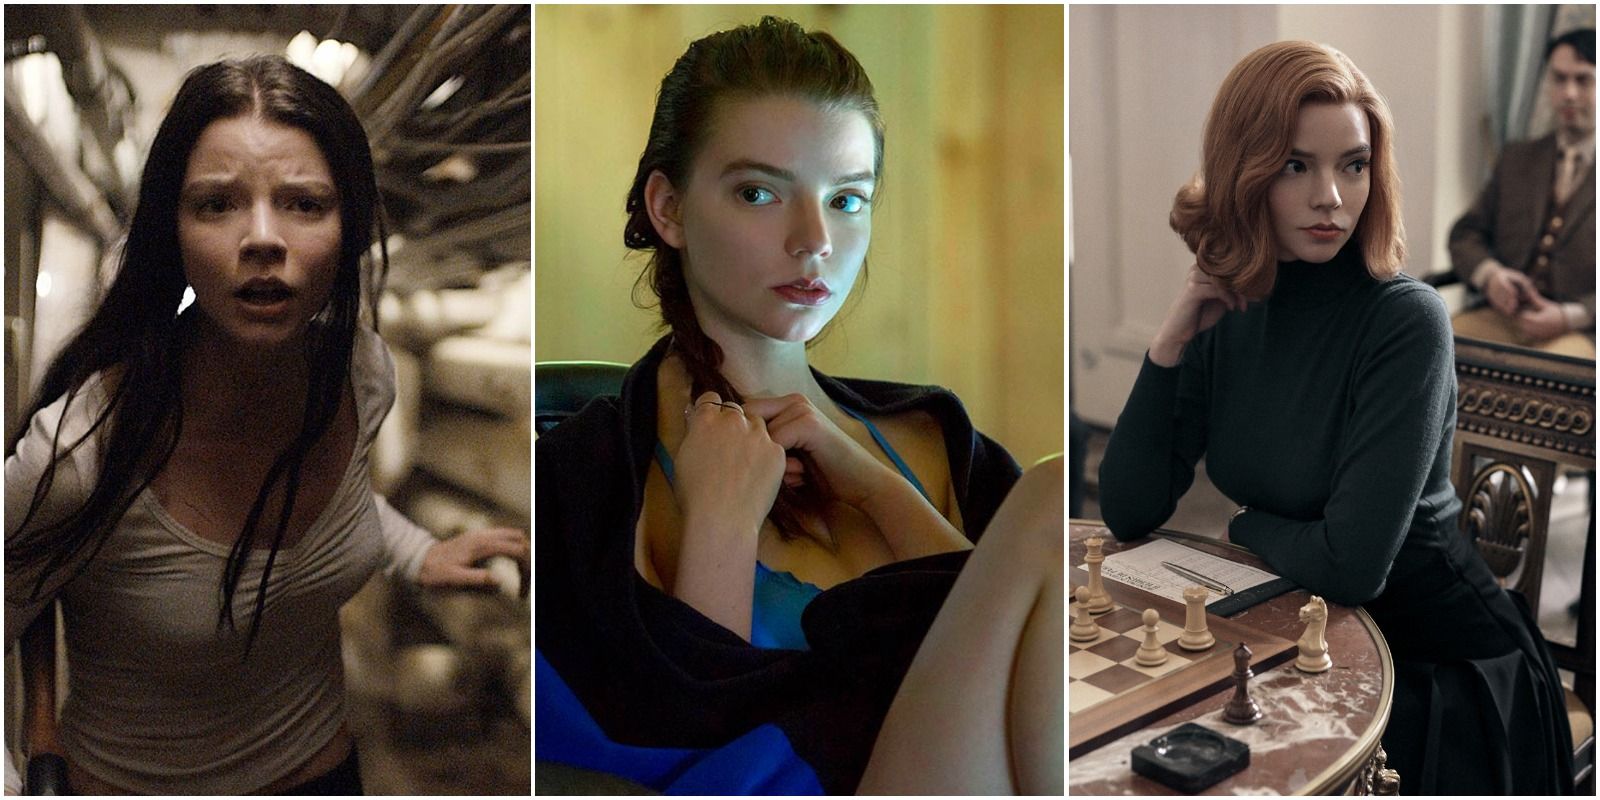 Anya Taylor-Joy’s 10 Best Film & TV Roles, According To Rotten Tomatoes